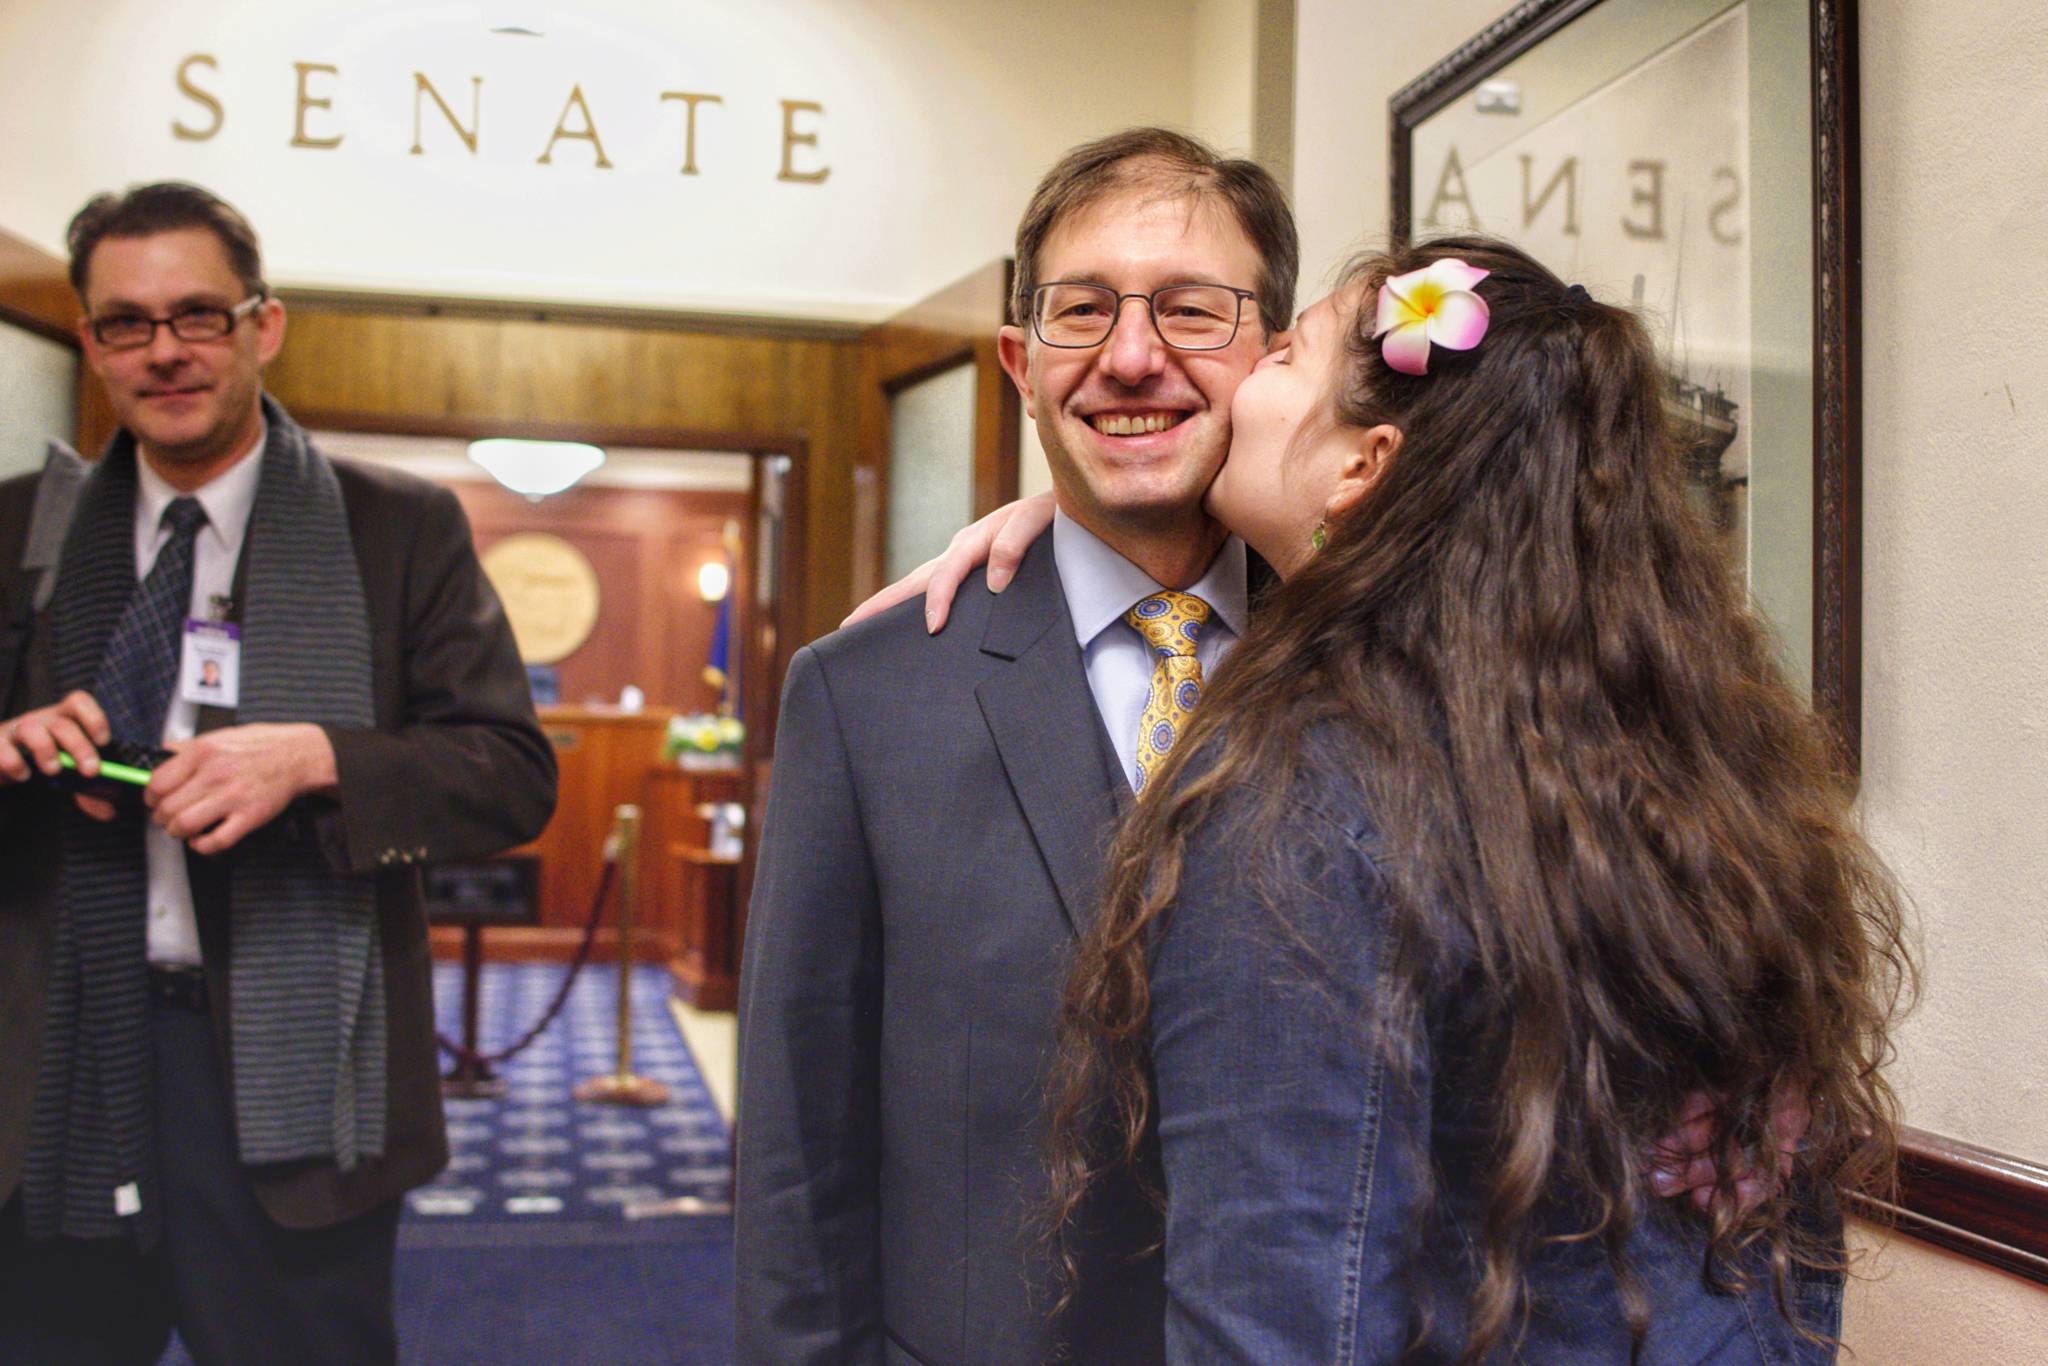 Sen. Jesse Kiehl, D-Juneau, receives a kiss from his daughter, Adara, before Kiehl is sworn in on the first day of the 31st Session of the Alaska Legislature on Tuesday, Jan. 15, 2019. (Michael Penn | Juneau Empire)